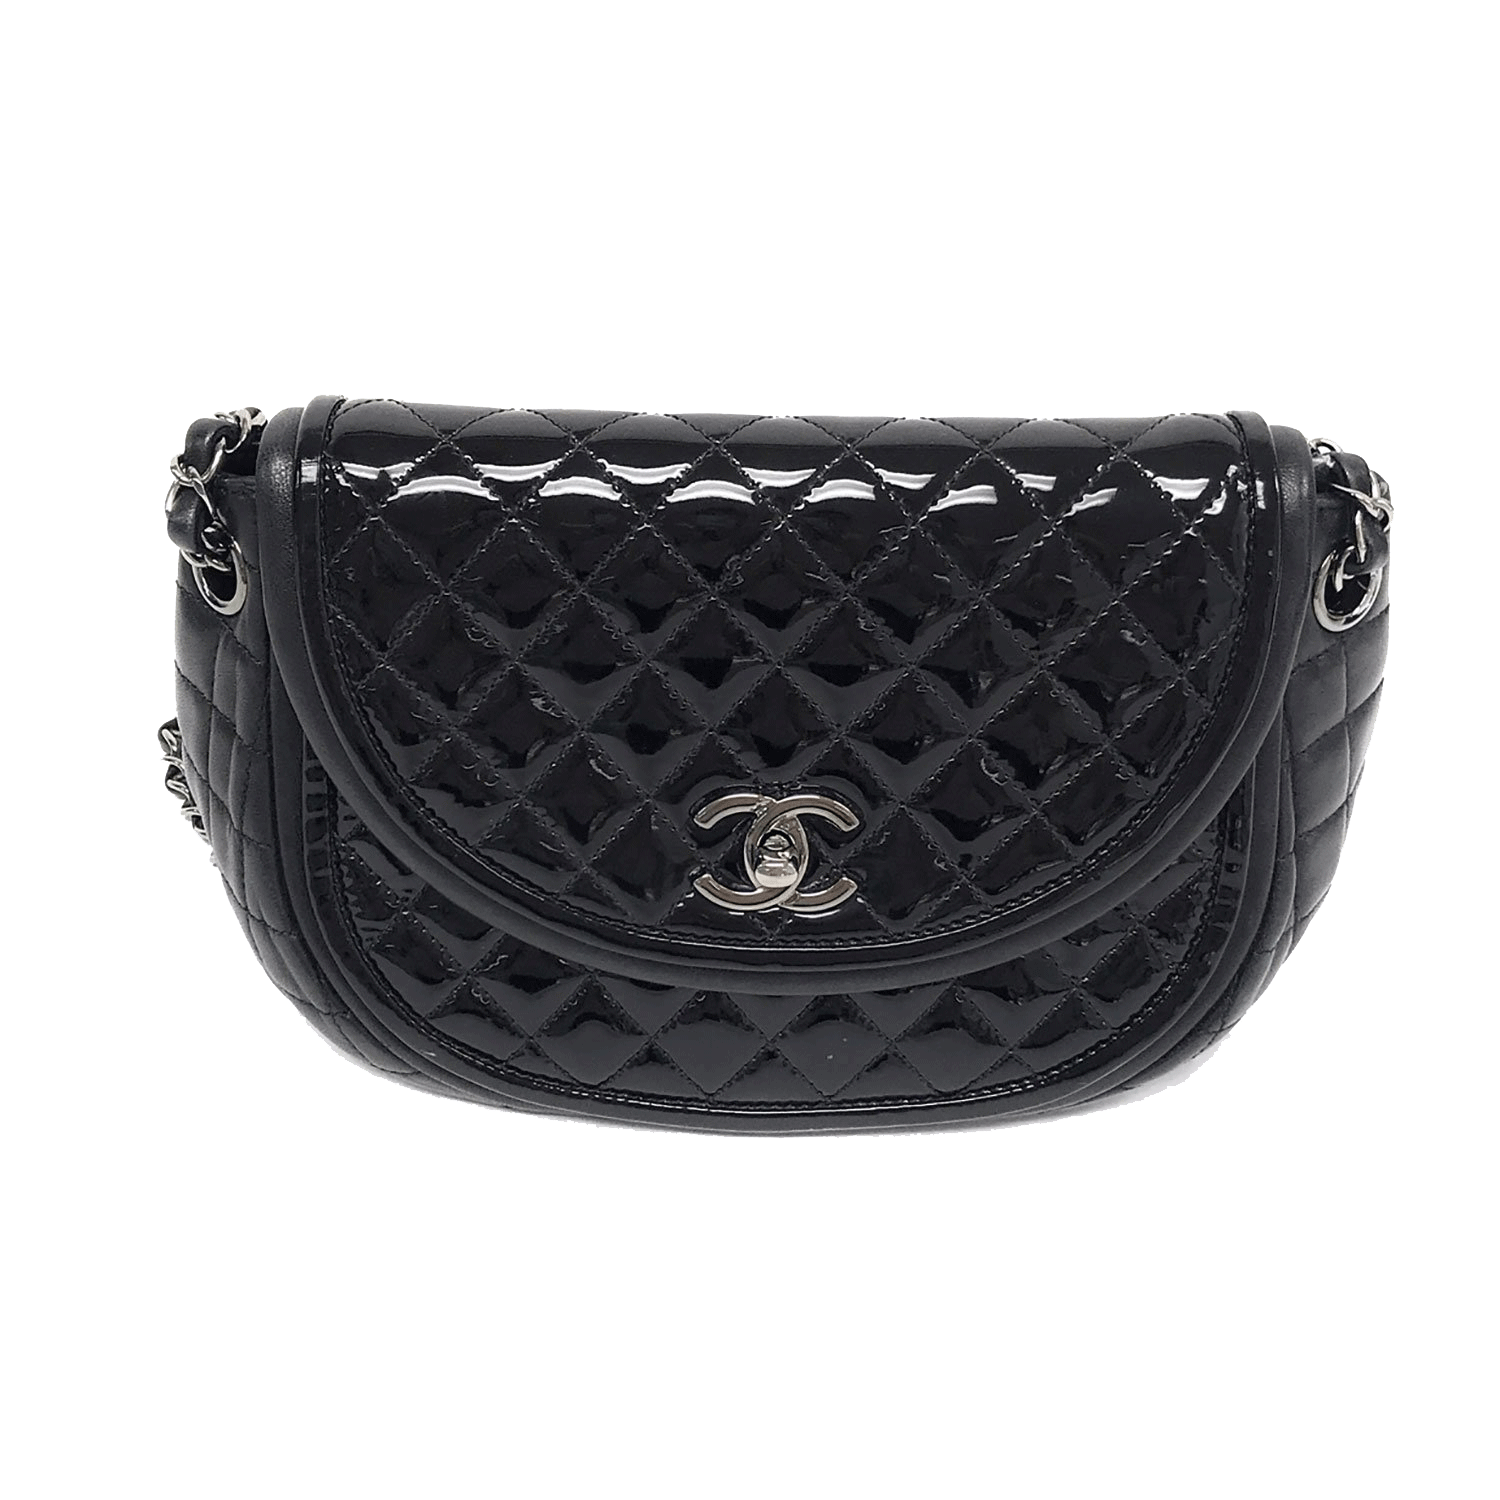 Sell Your Chanel Bag for Cash at Biltmore Loan and Jewelry